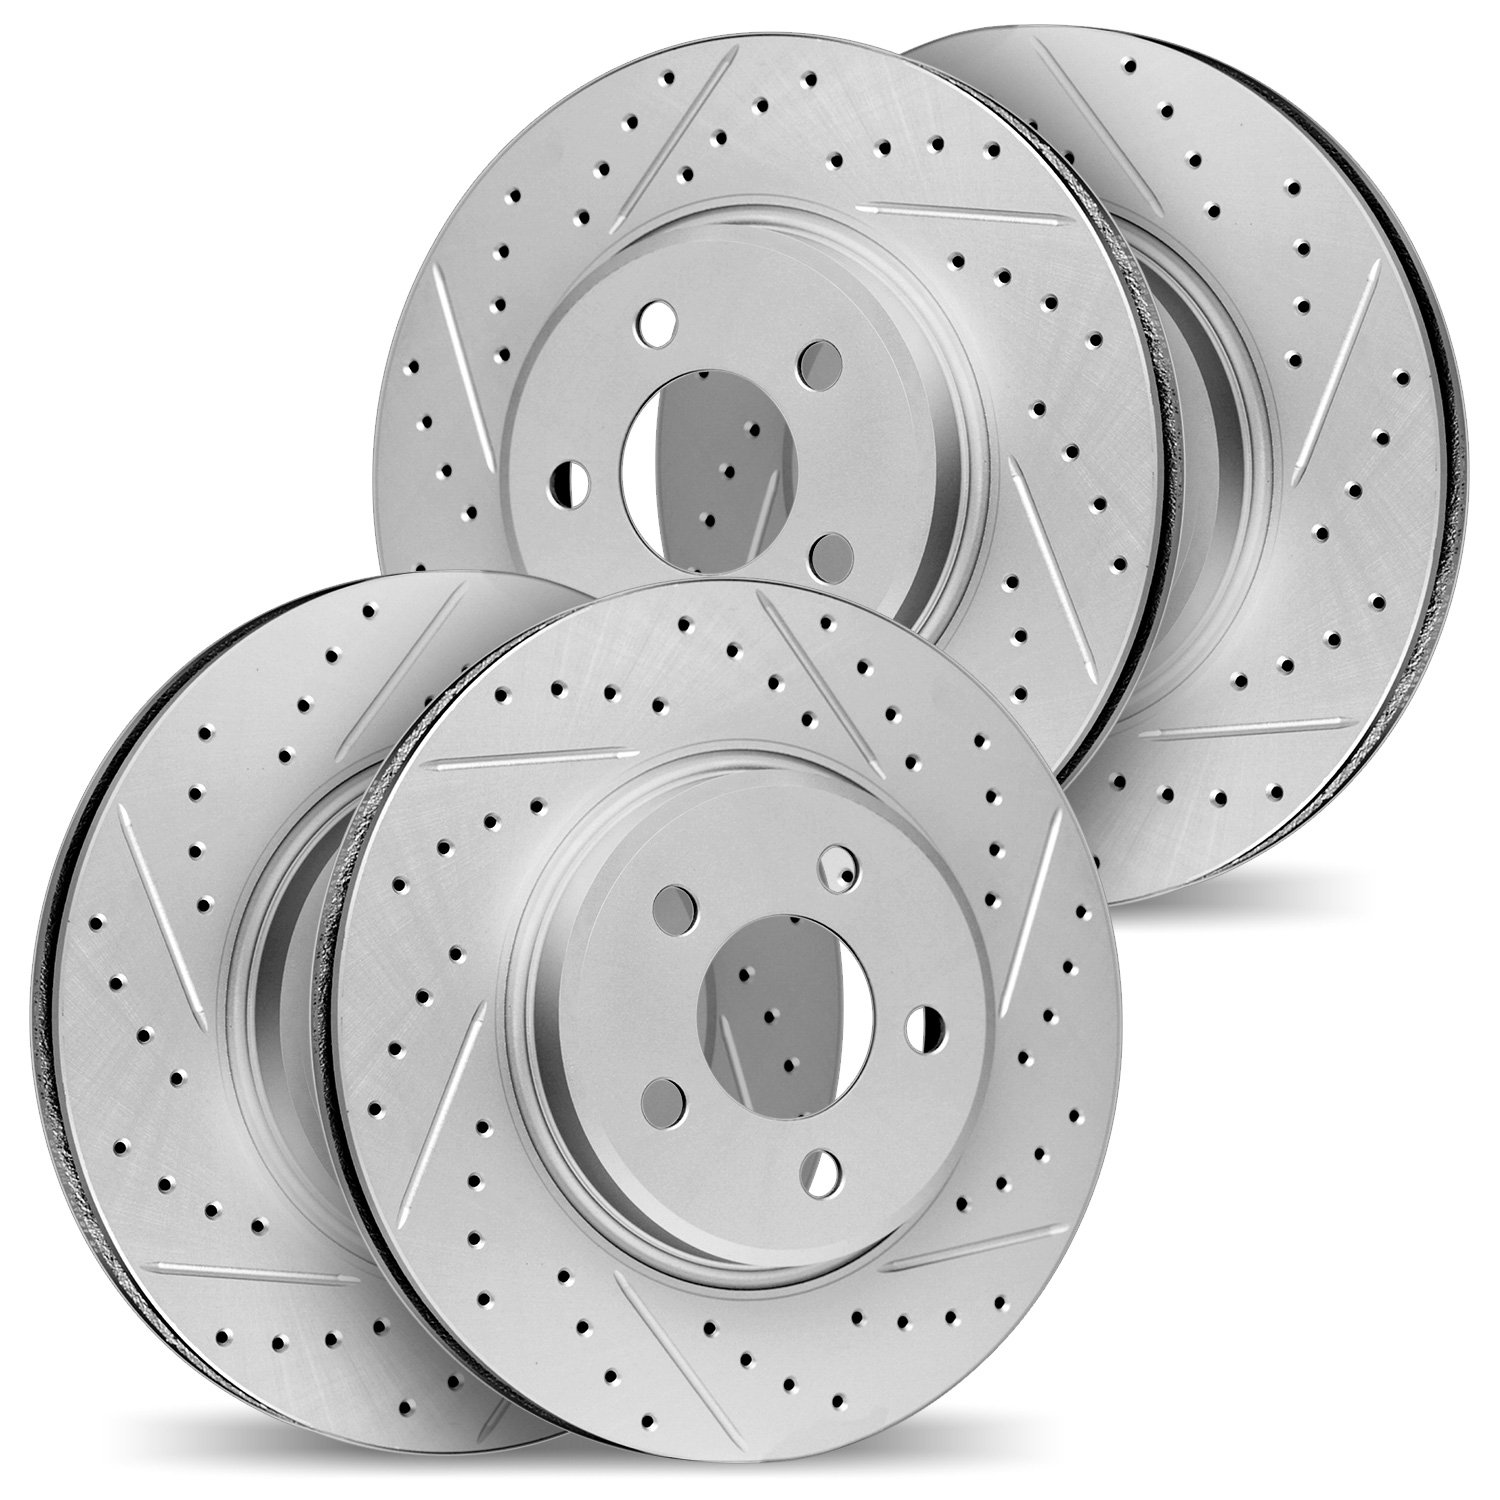 2004-31015 Geoperformance Drilled/Slotted Brake Rotors, 2007-2013 BMW, Position: Front and Rear